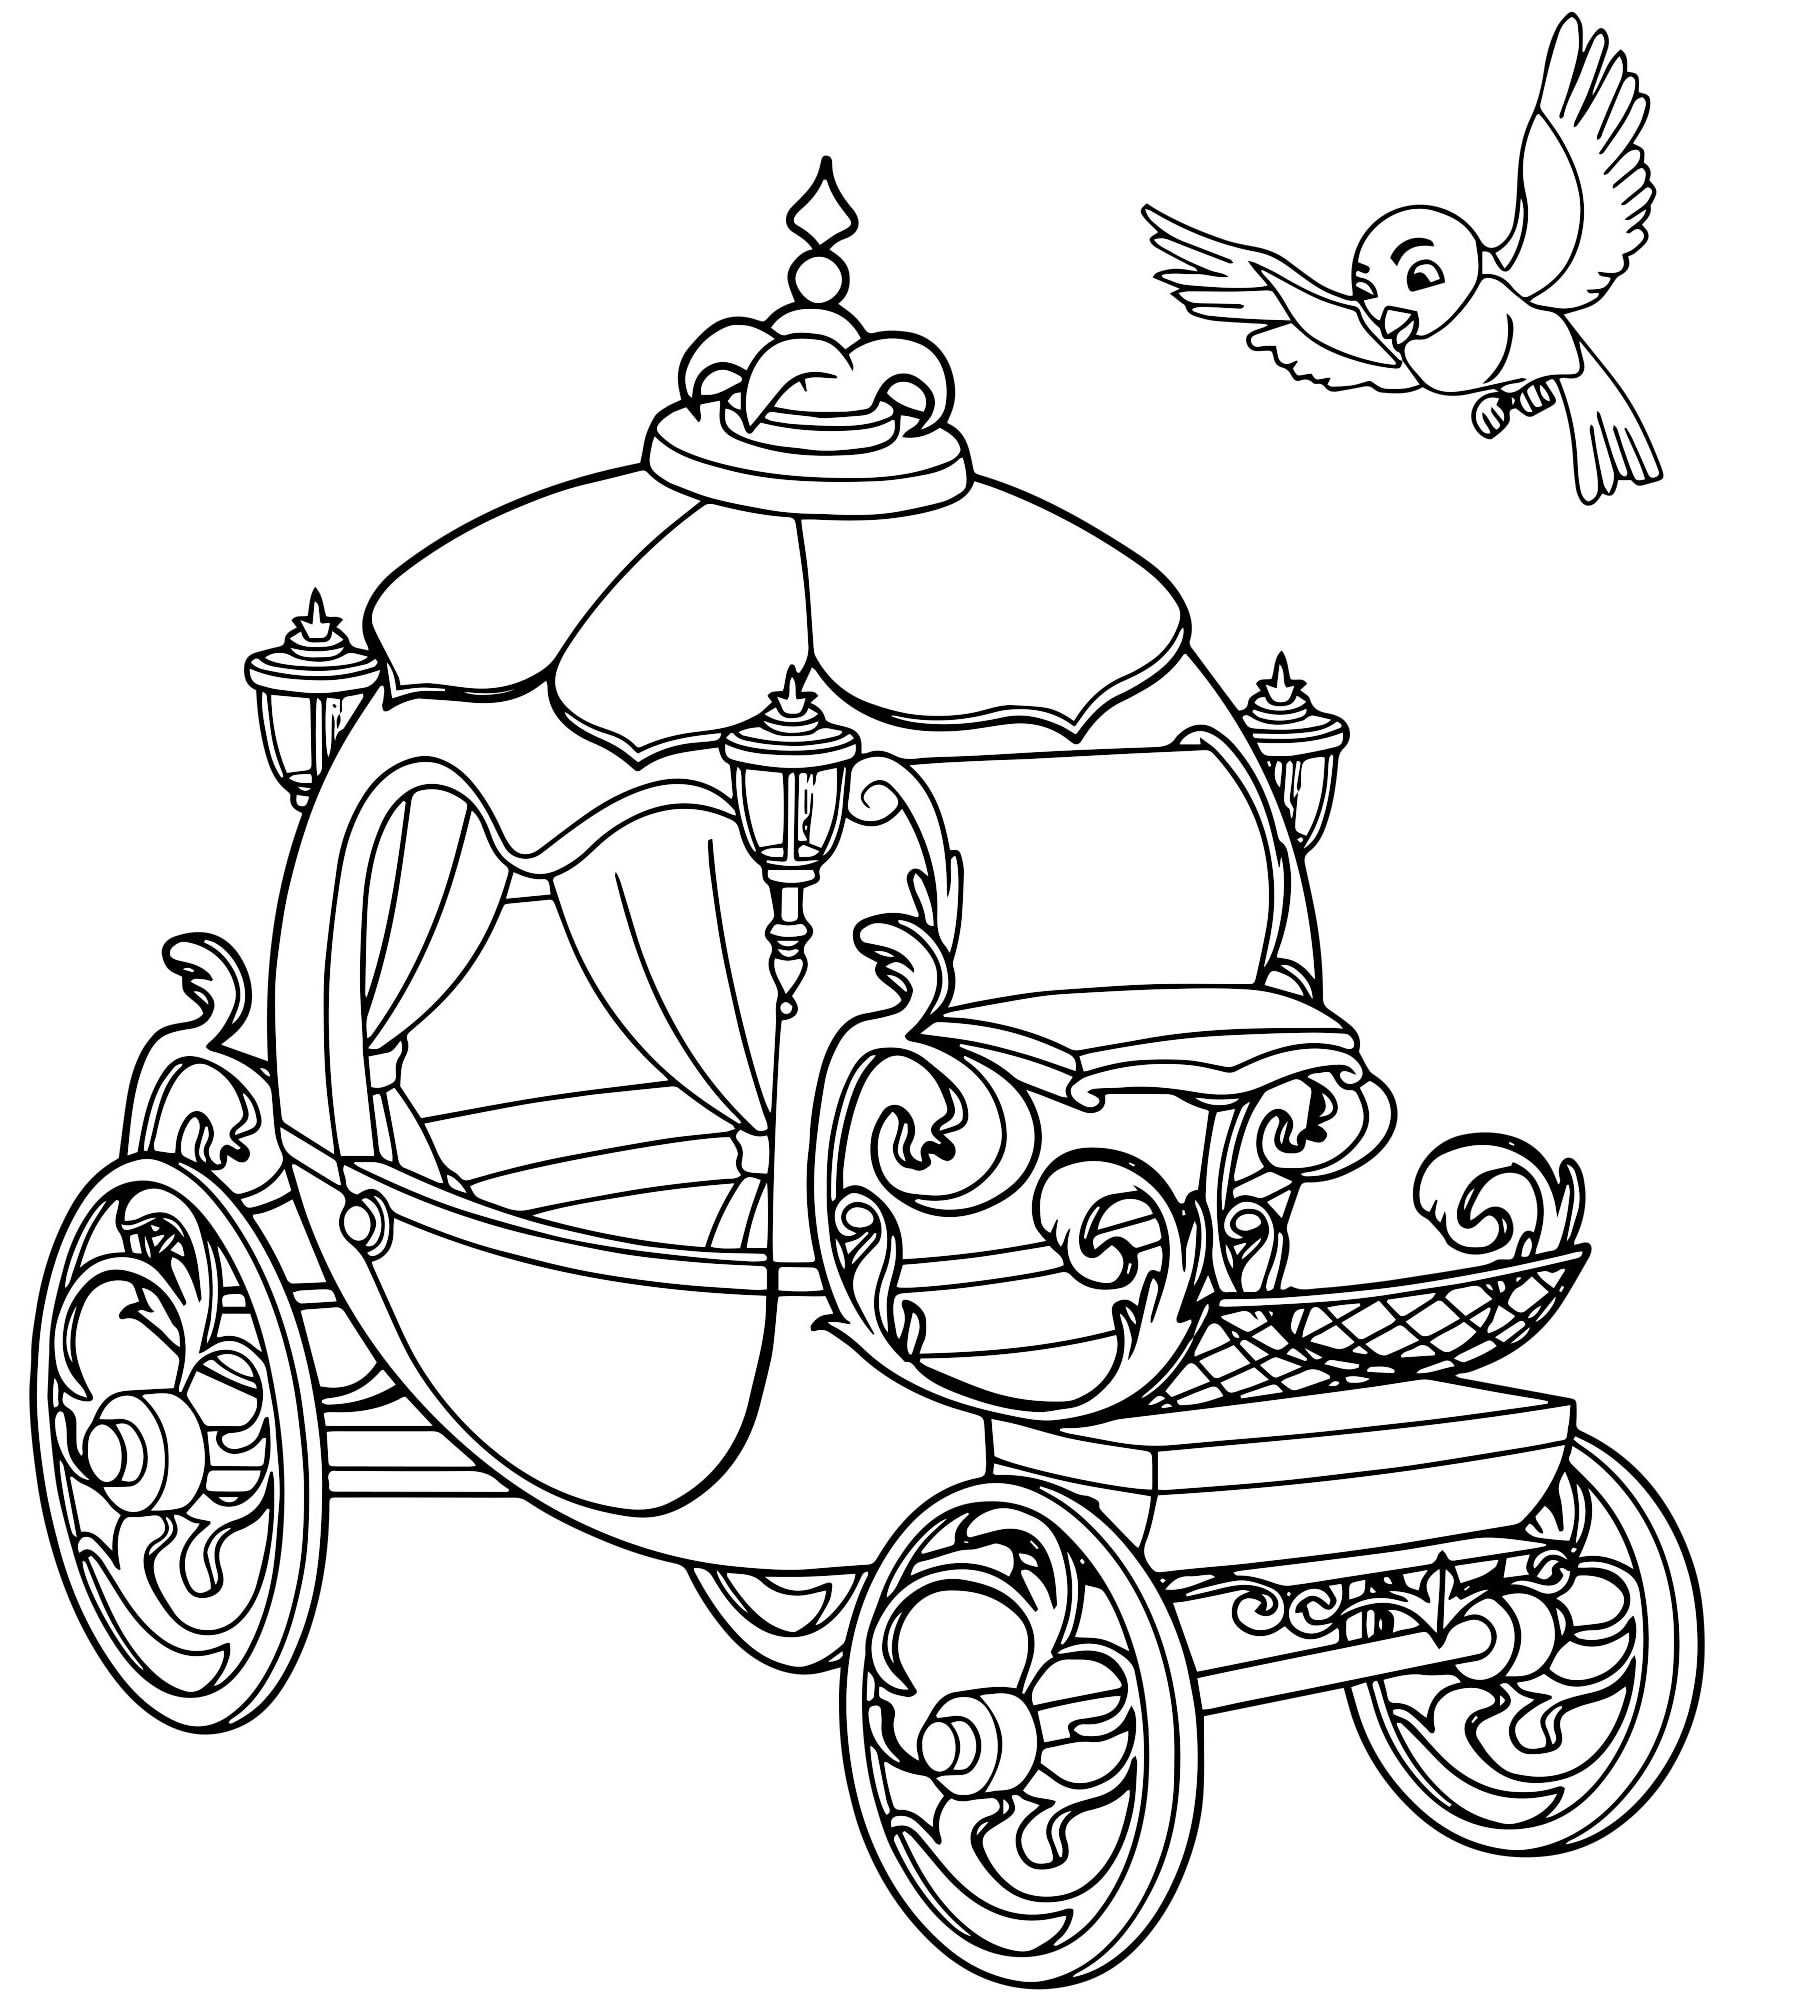 Shining carriage coloring book for kids